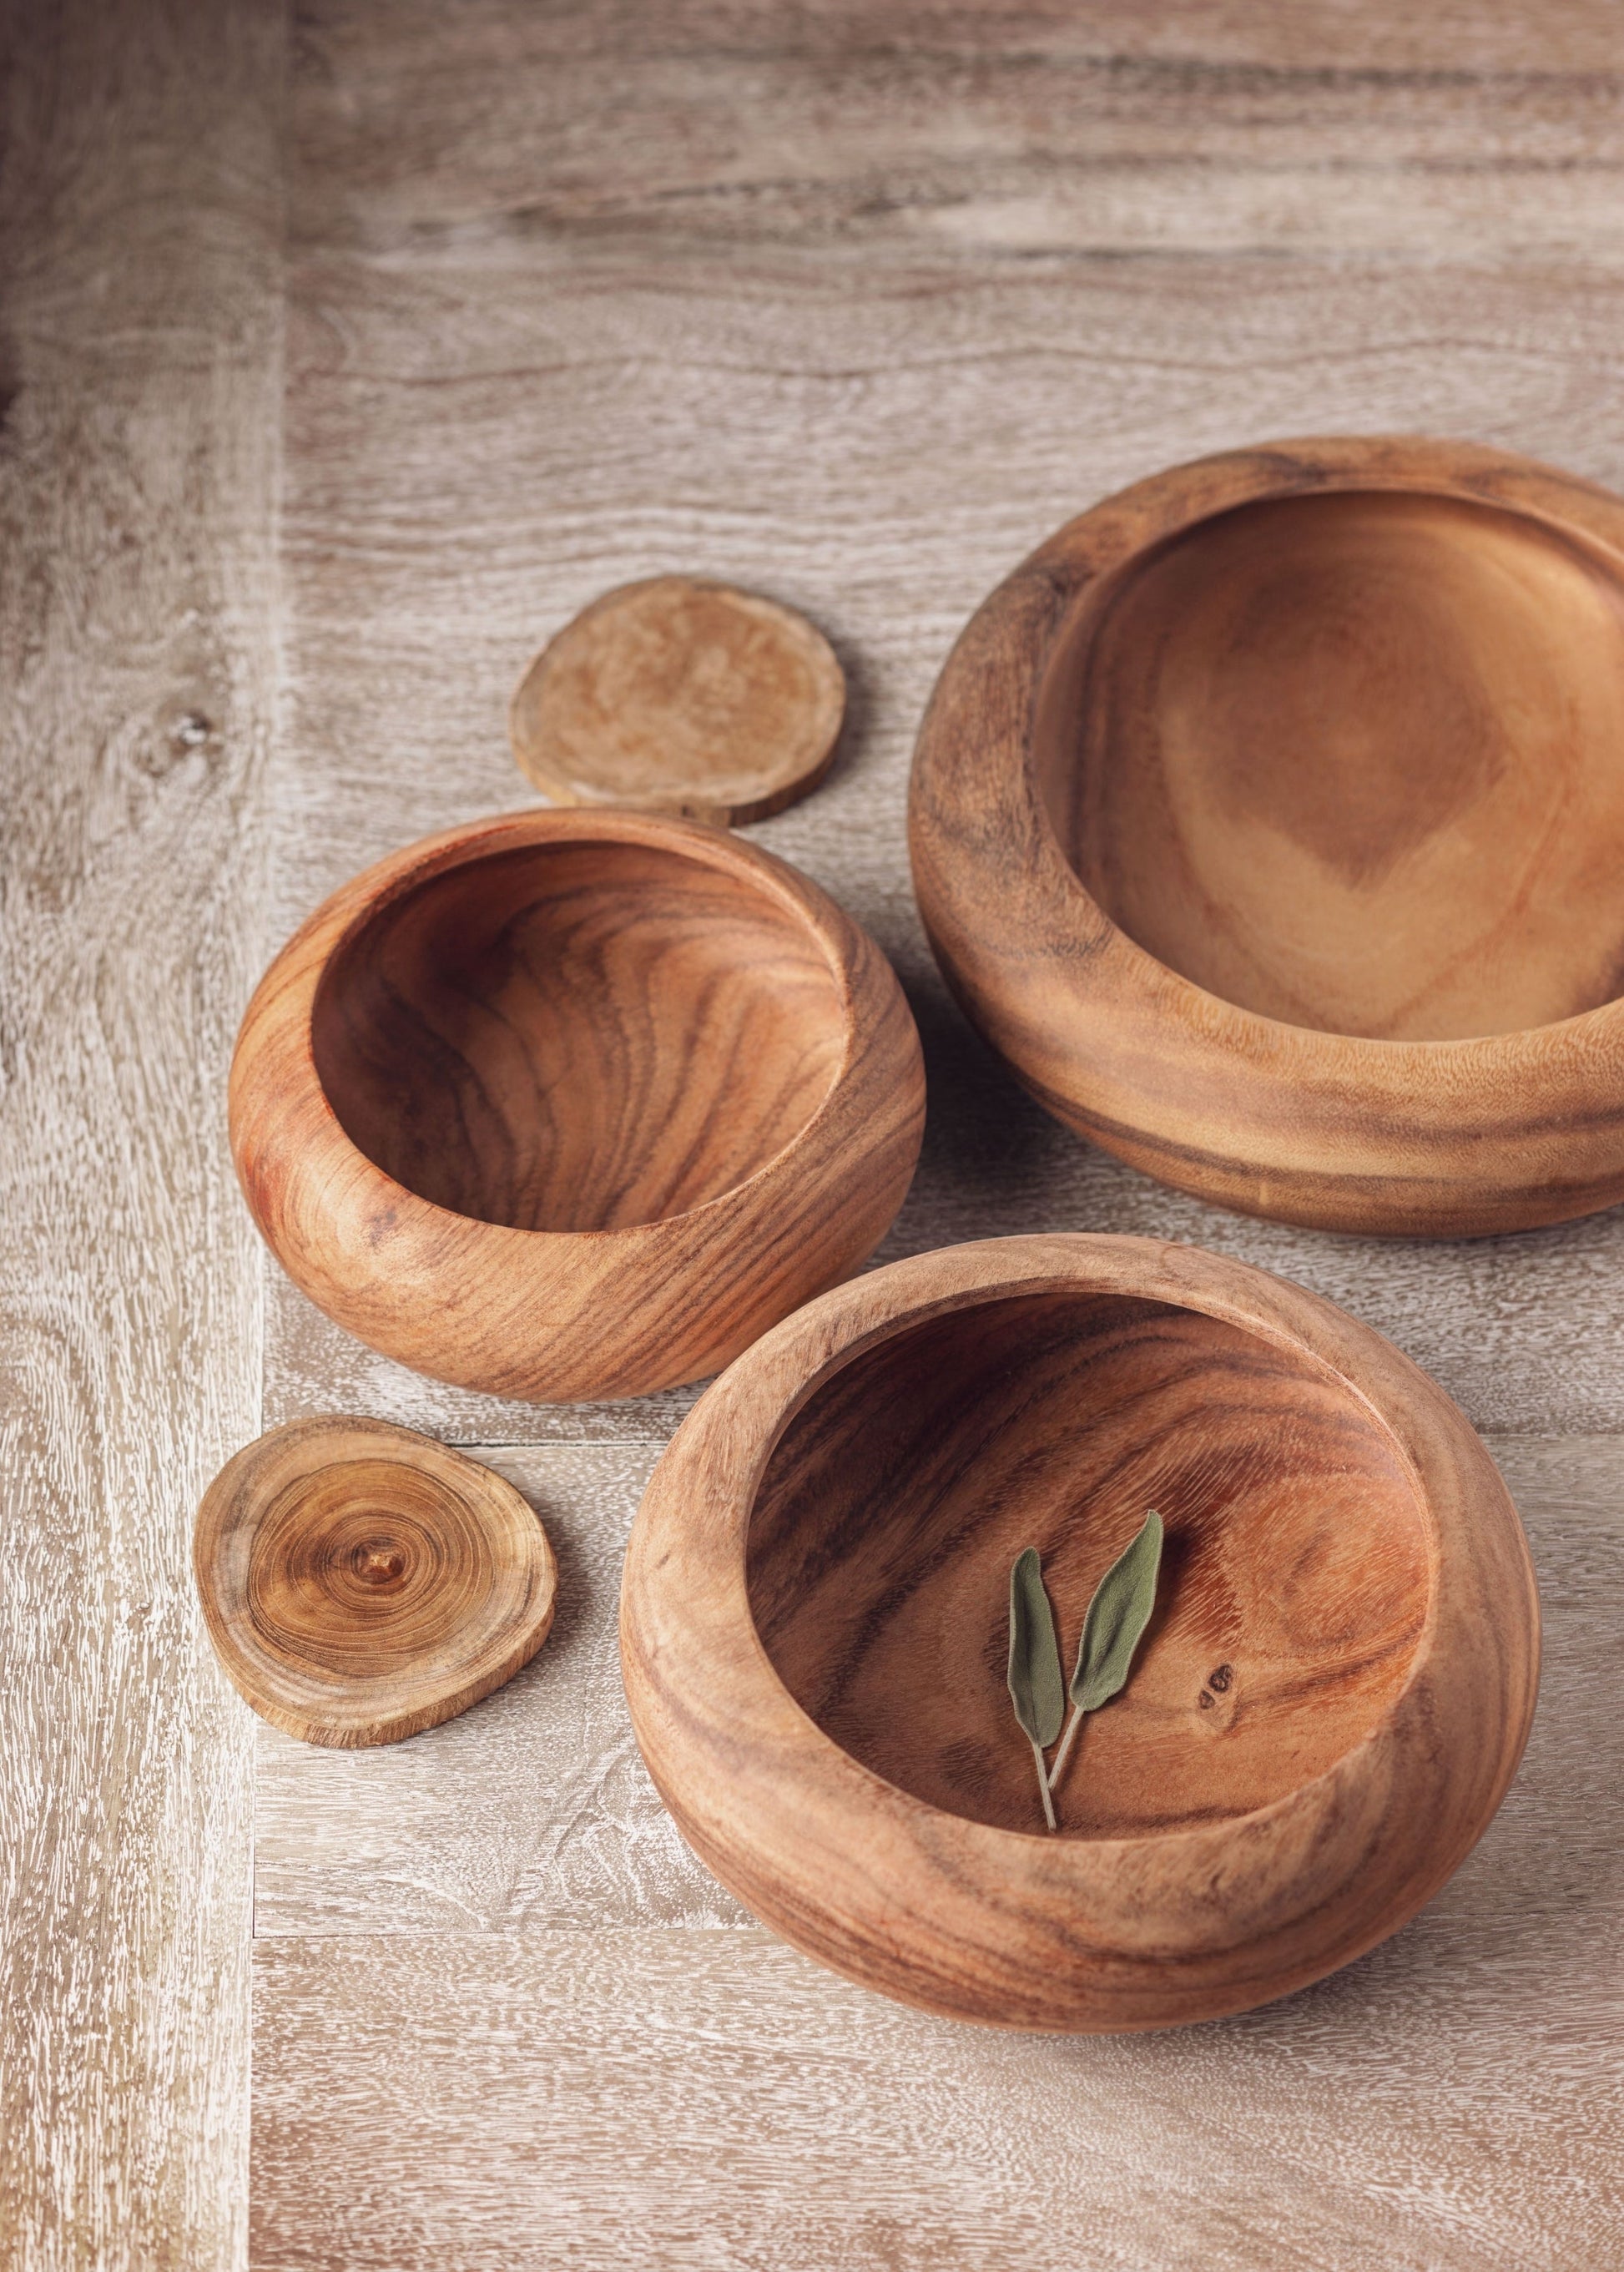 assorted sizes of round wooden bowls on a light wooden table.